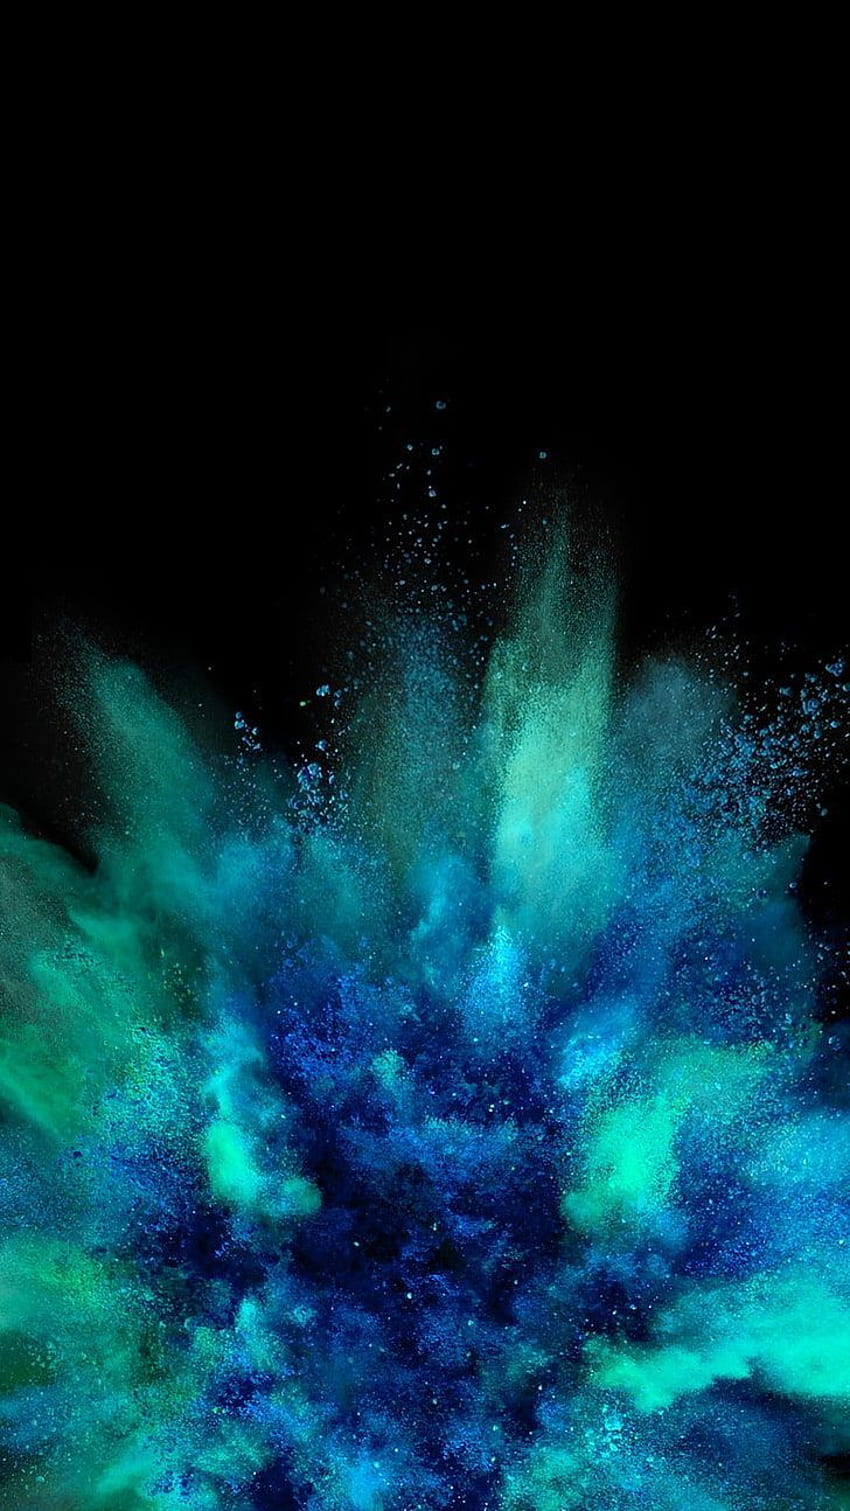 : blue and green powder, teal and blue powders, explosion, colorful ...